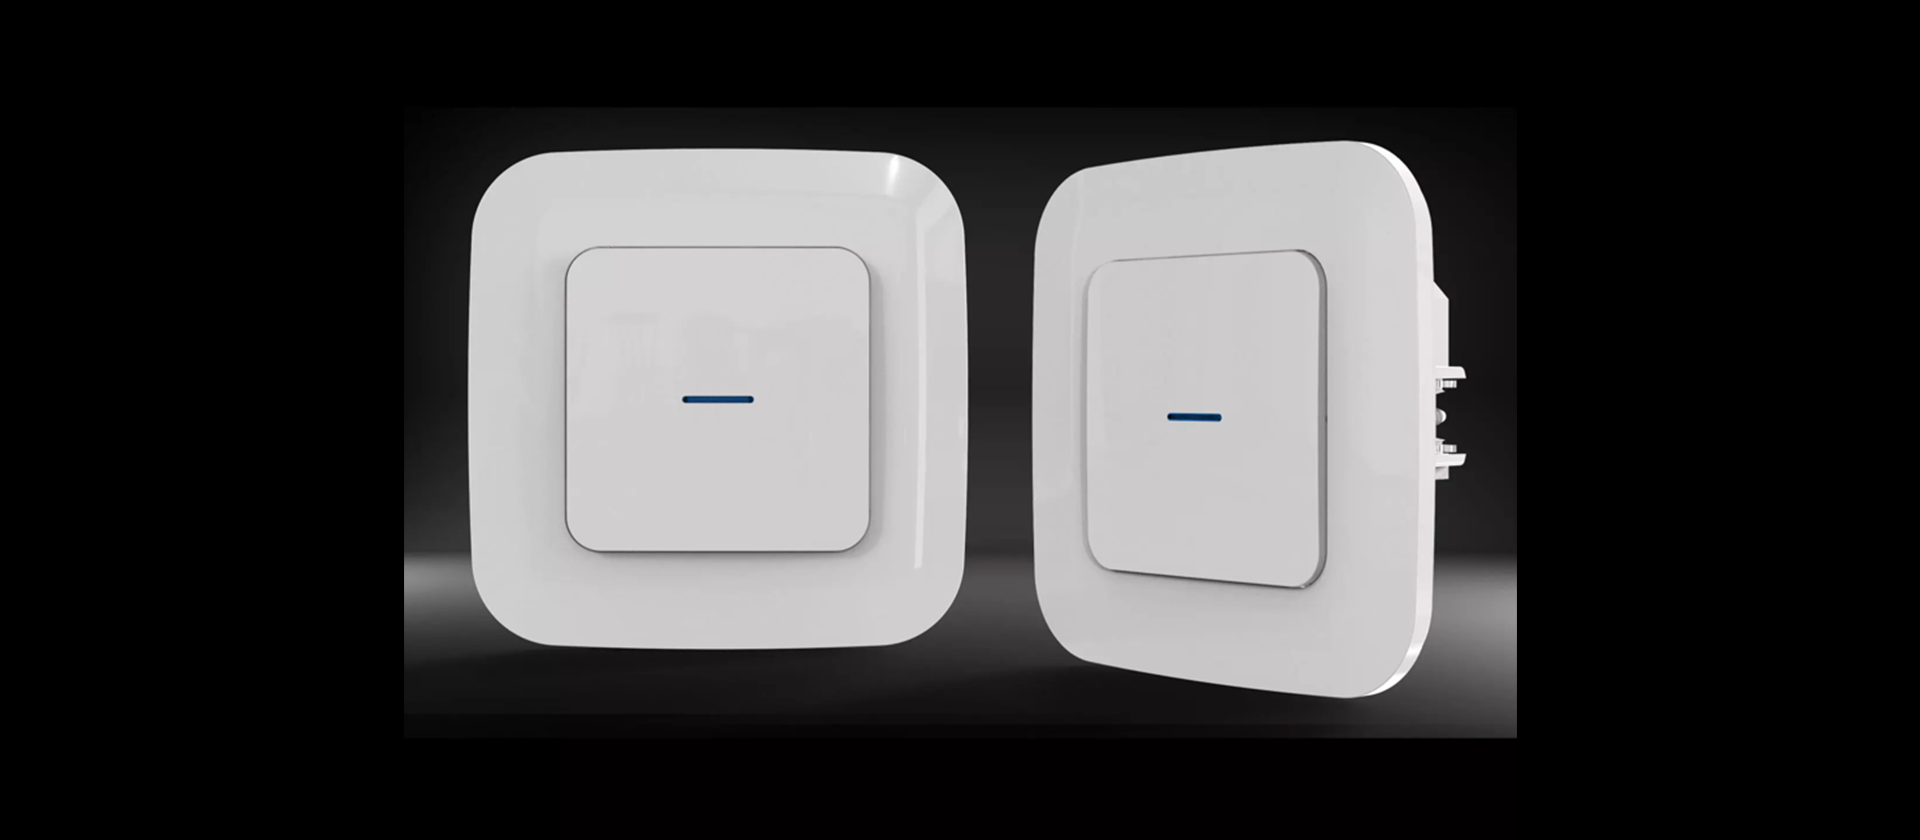 How to utilize Intelligent switches in your home?